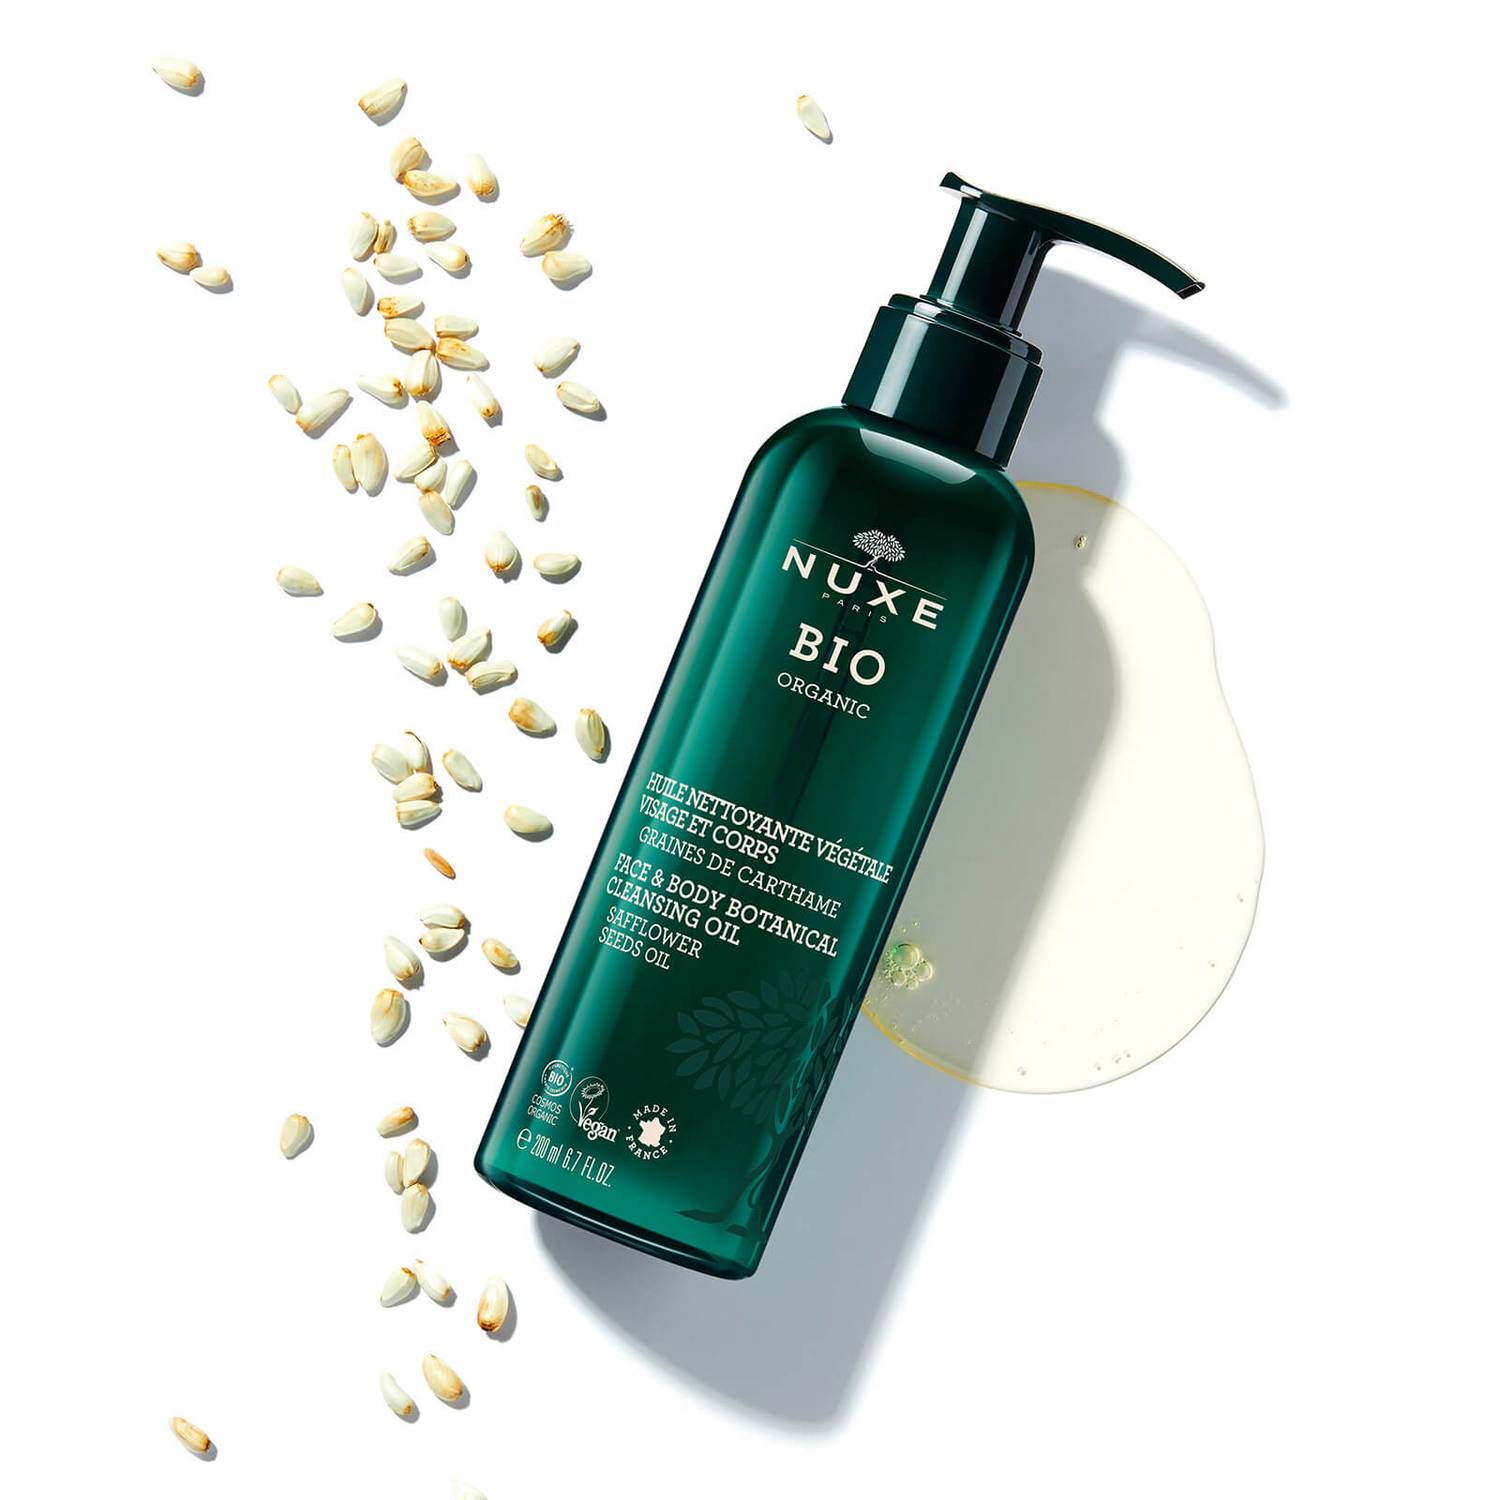 Nuxe Organic - Botanical Cleansing Oil has a special oil-based formula dissolves impurities and then morphs into a milk texture when combined with water, allowing for swift and effortless rinsing.